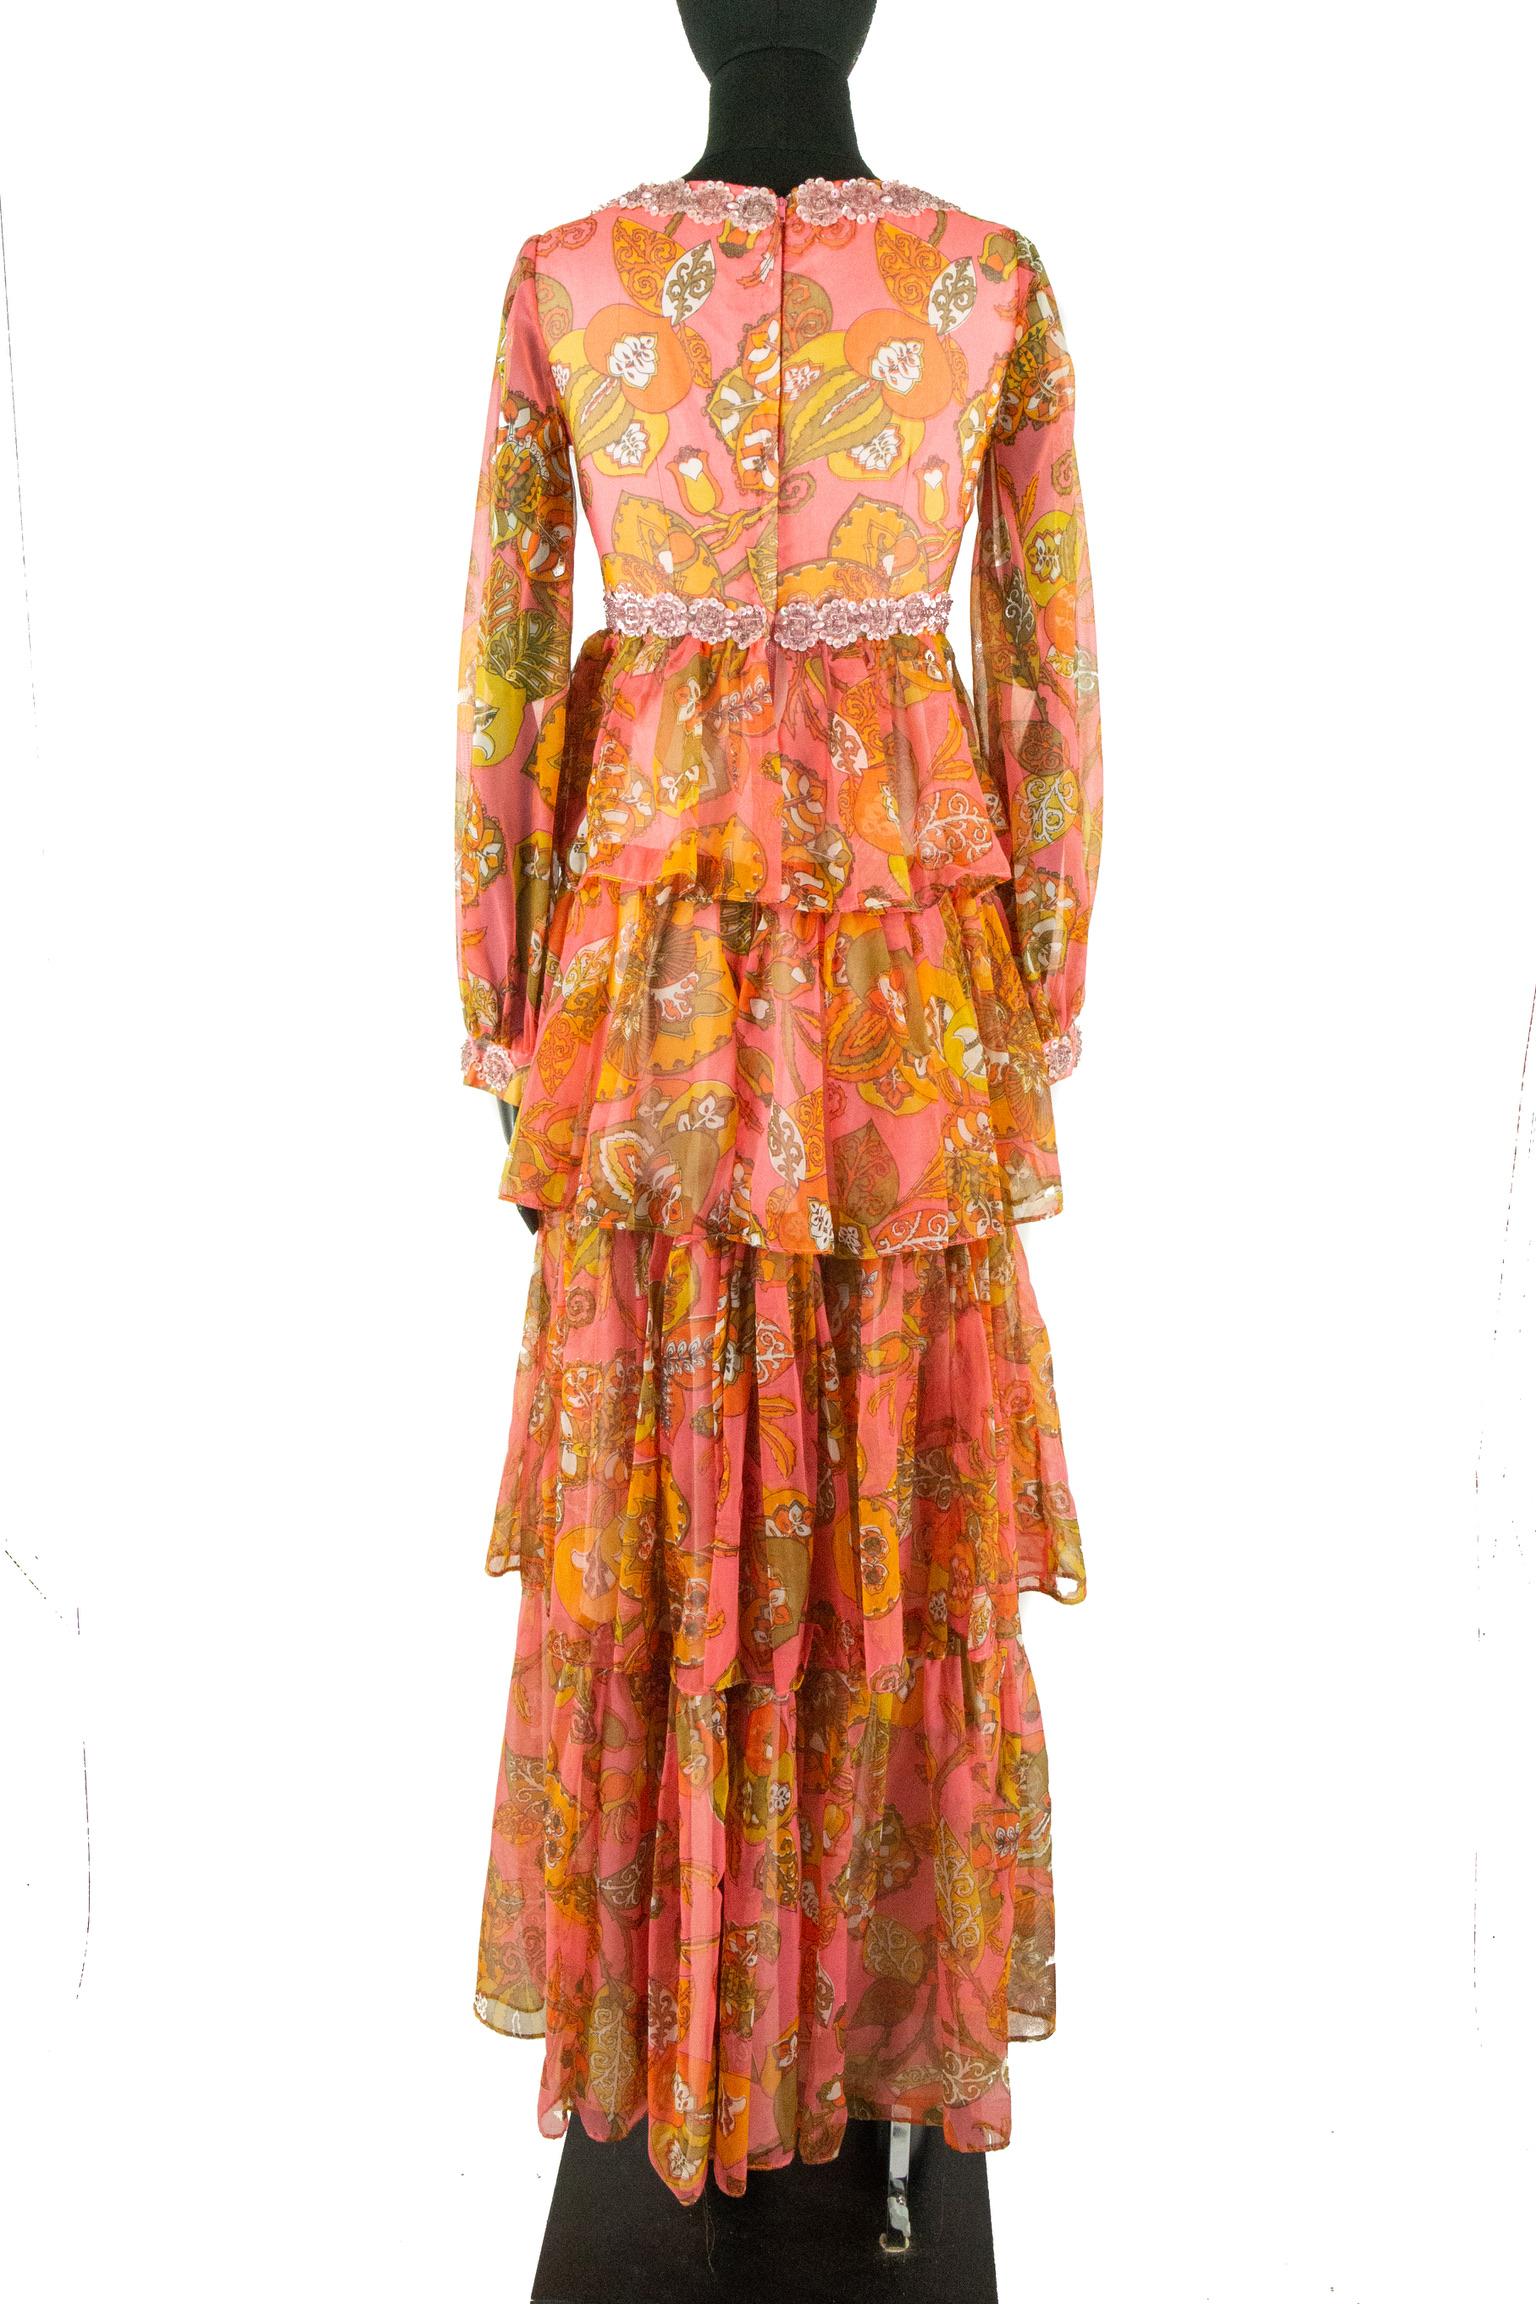 A Vintage 1970s Pauline dress; featuring a coral psychedelic print of peach and white flower swirling into golden-brown leaves. The bodice features a scooped neckline and empire waistline, both of which are embellished with small roses made of